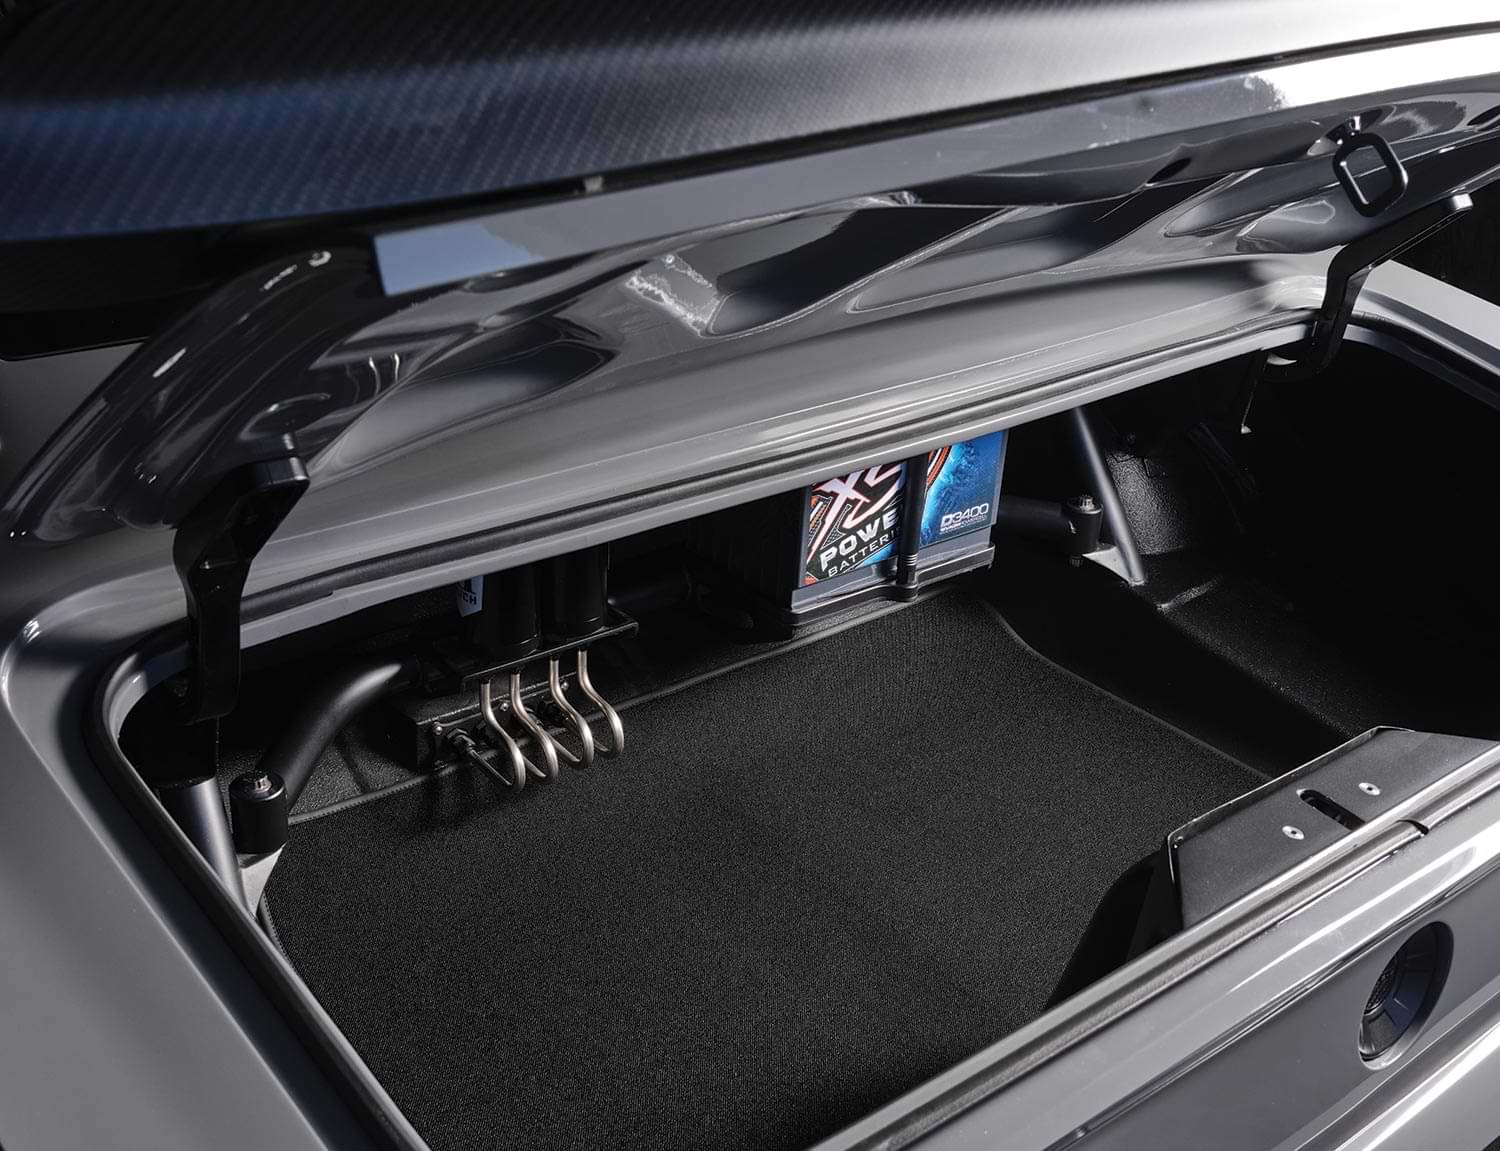 view inside the '69 Camaro's open tailgate